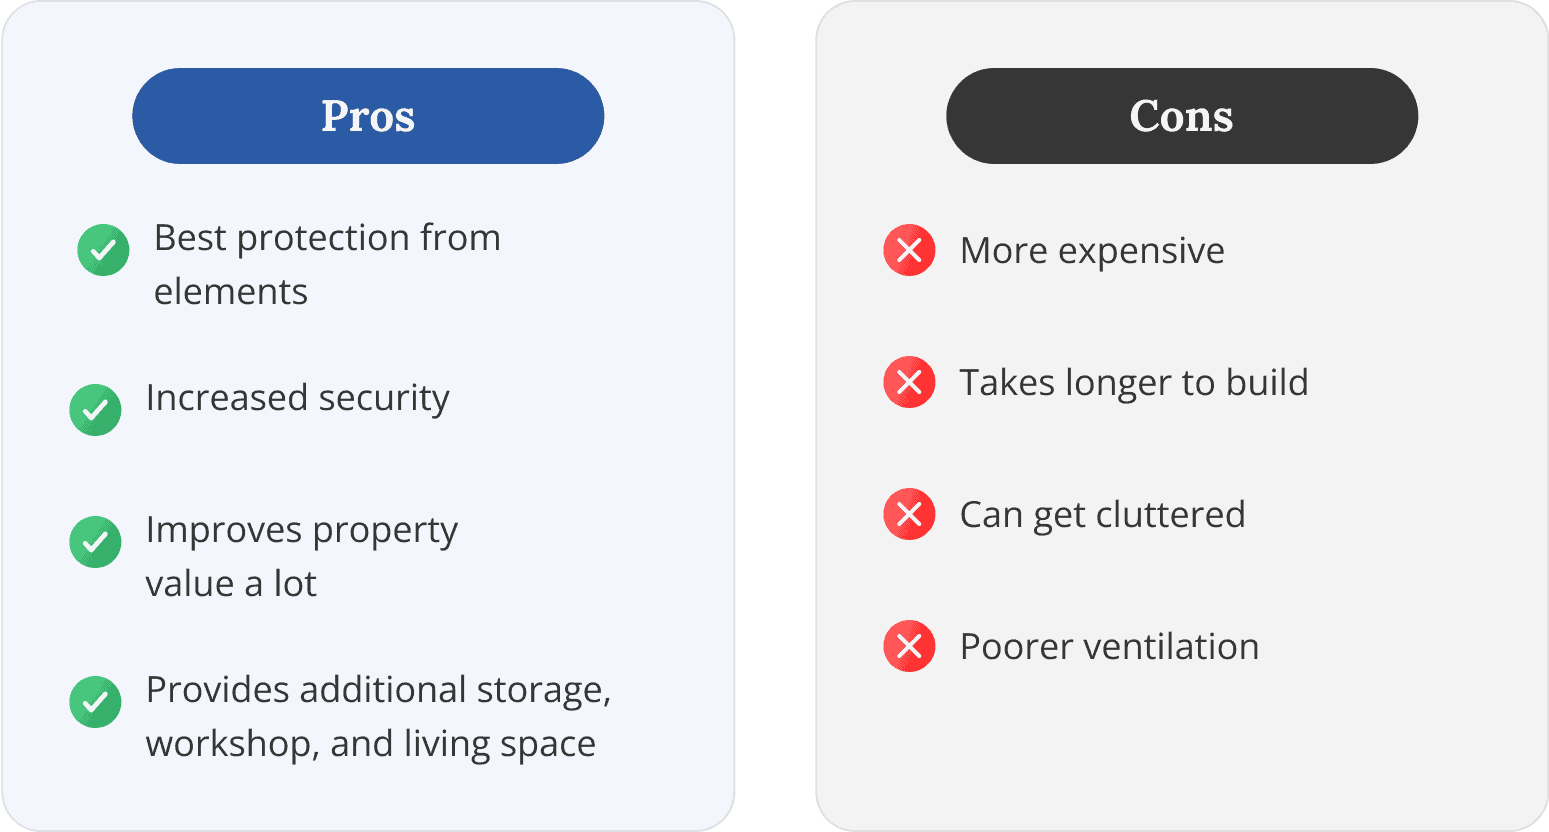 A list of garage pros and cons